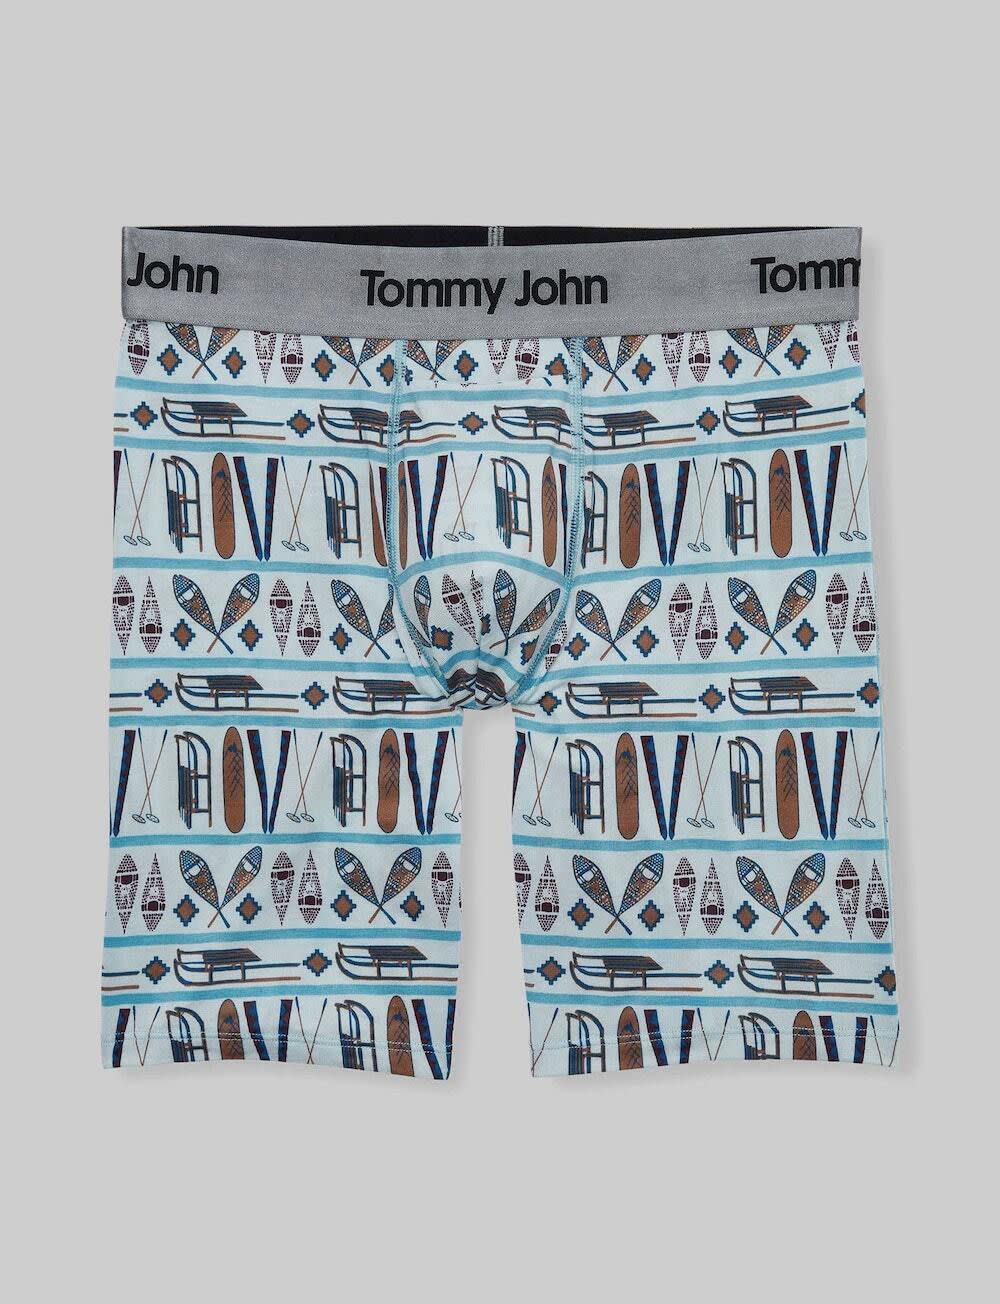 Tommy John Second Skin Mid-Length Boxer Brief 6"